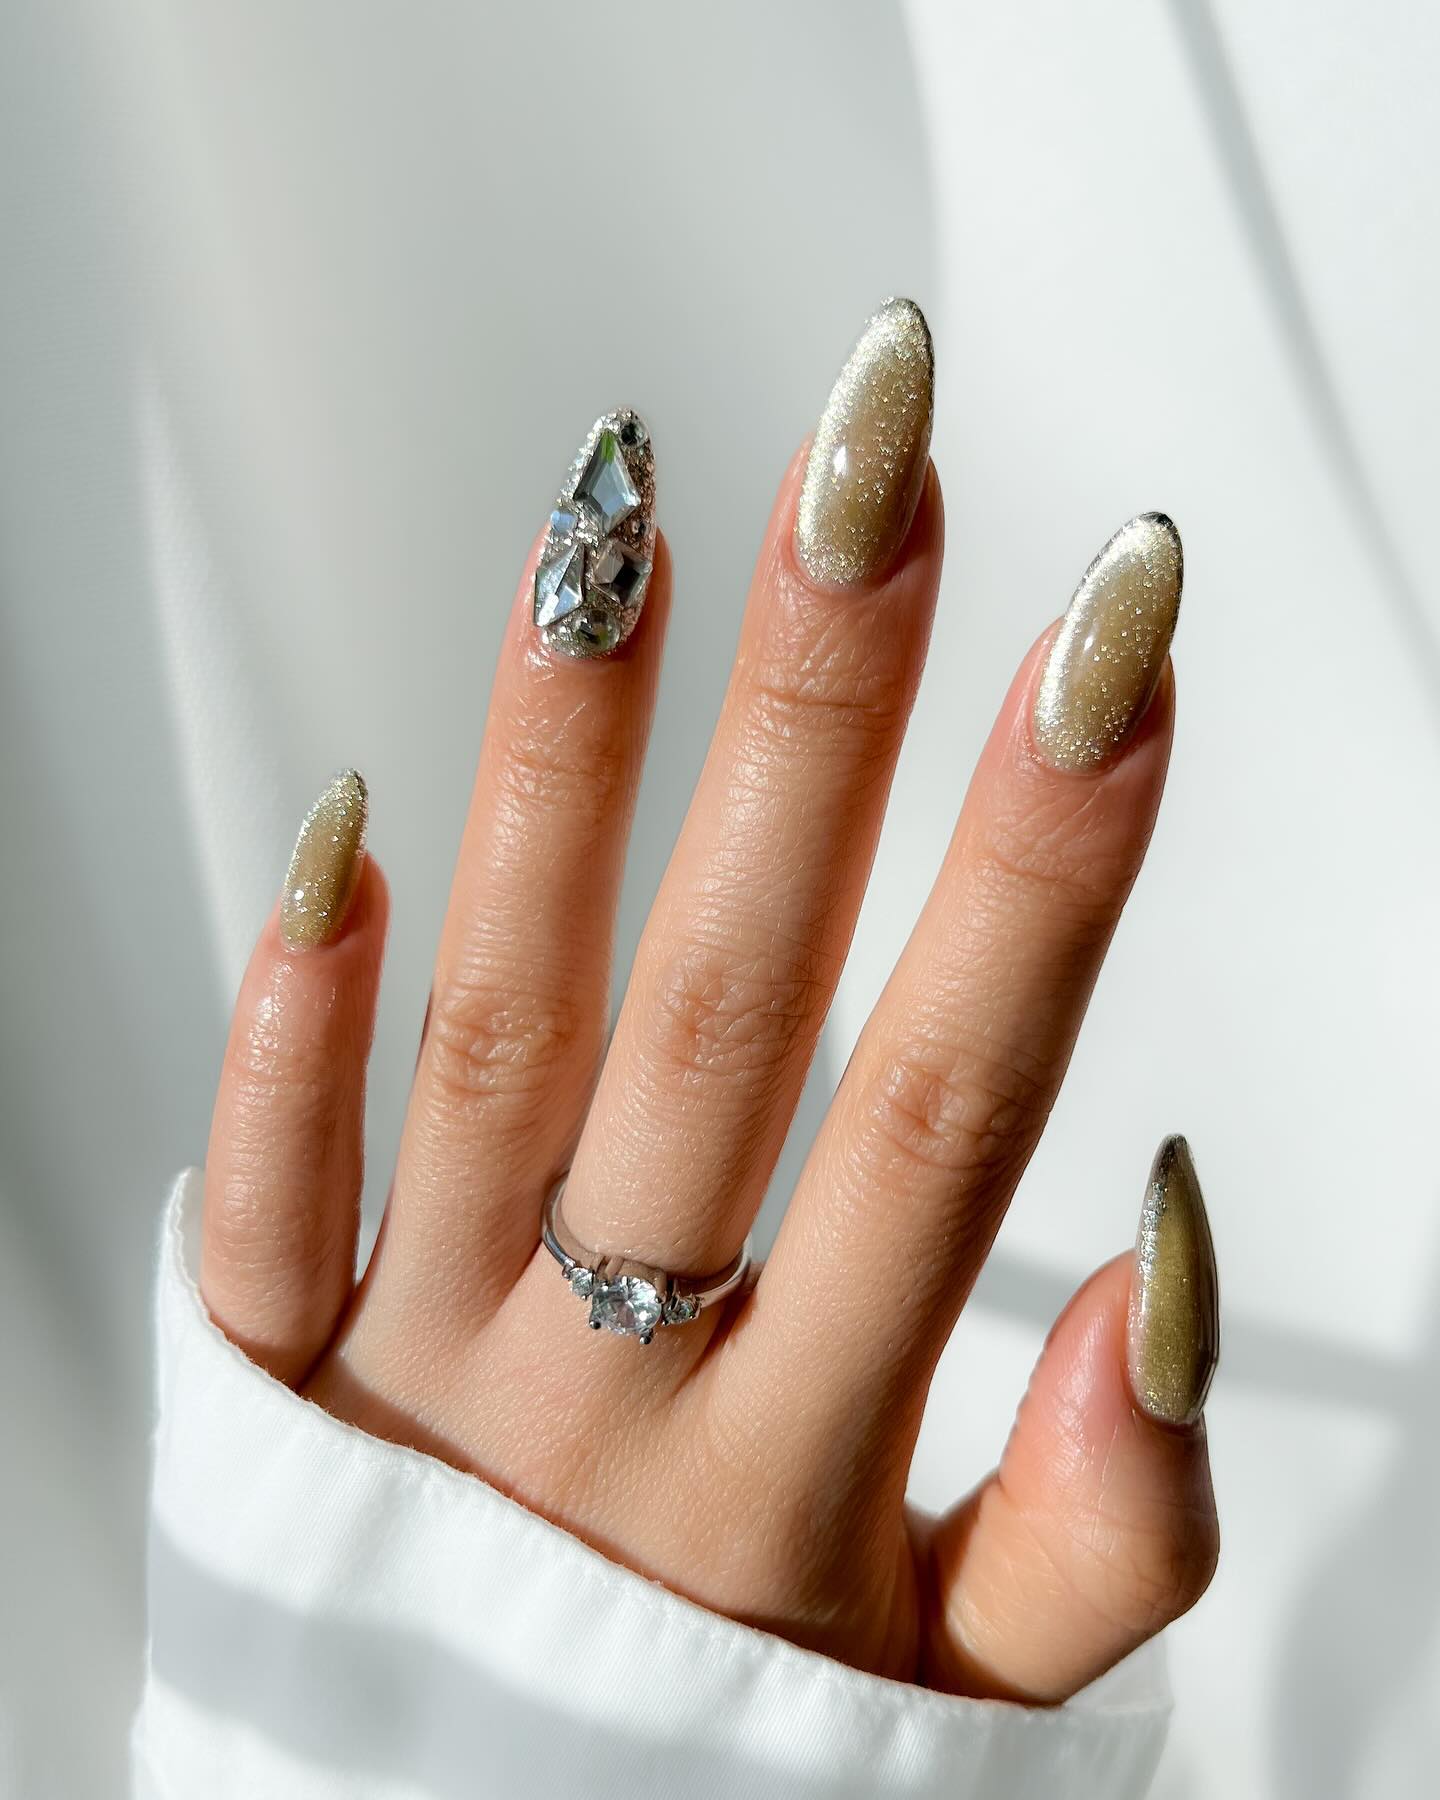 100+ Short Nail Designs You’ll Want To Try This Year images 92